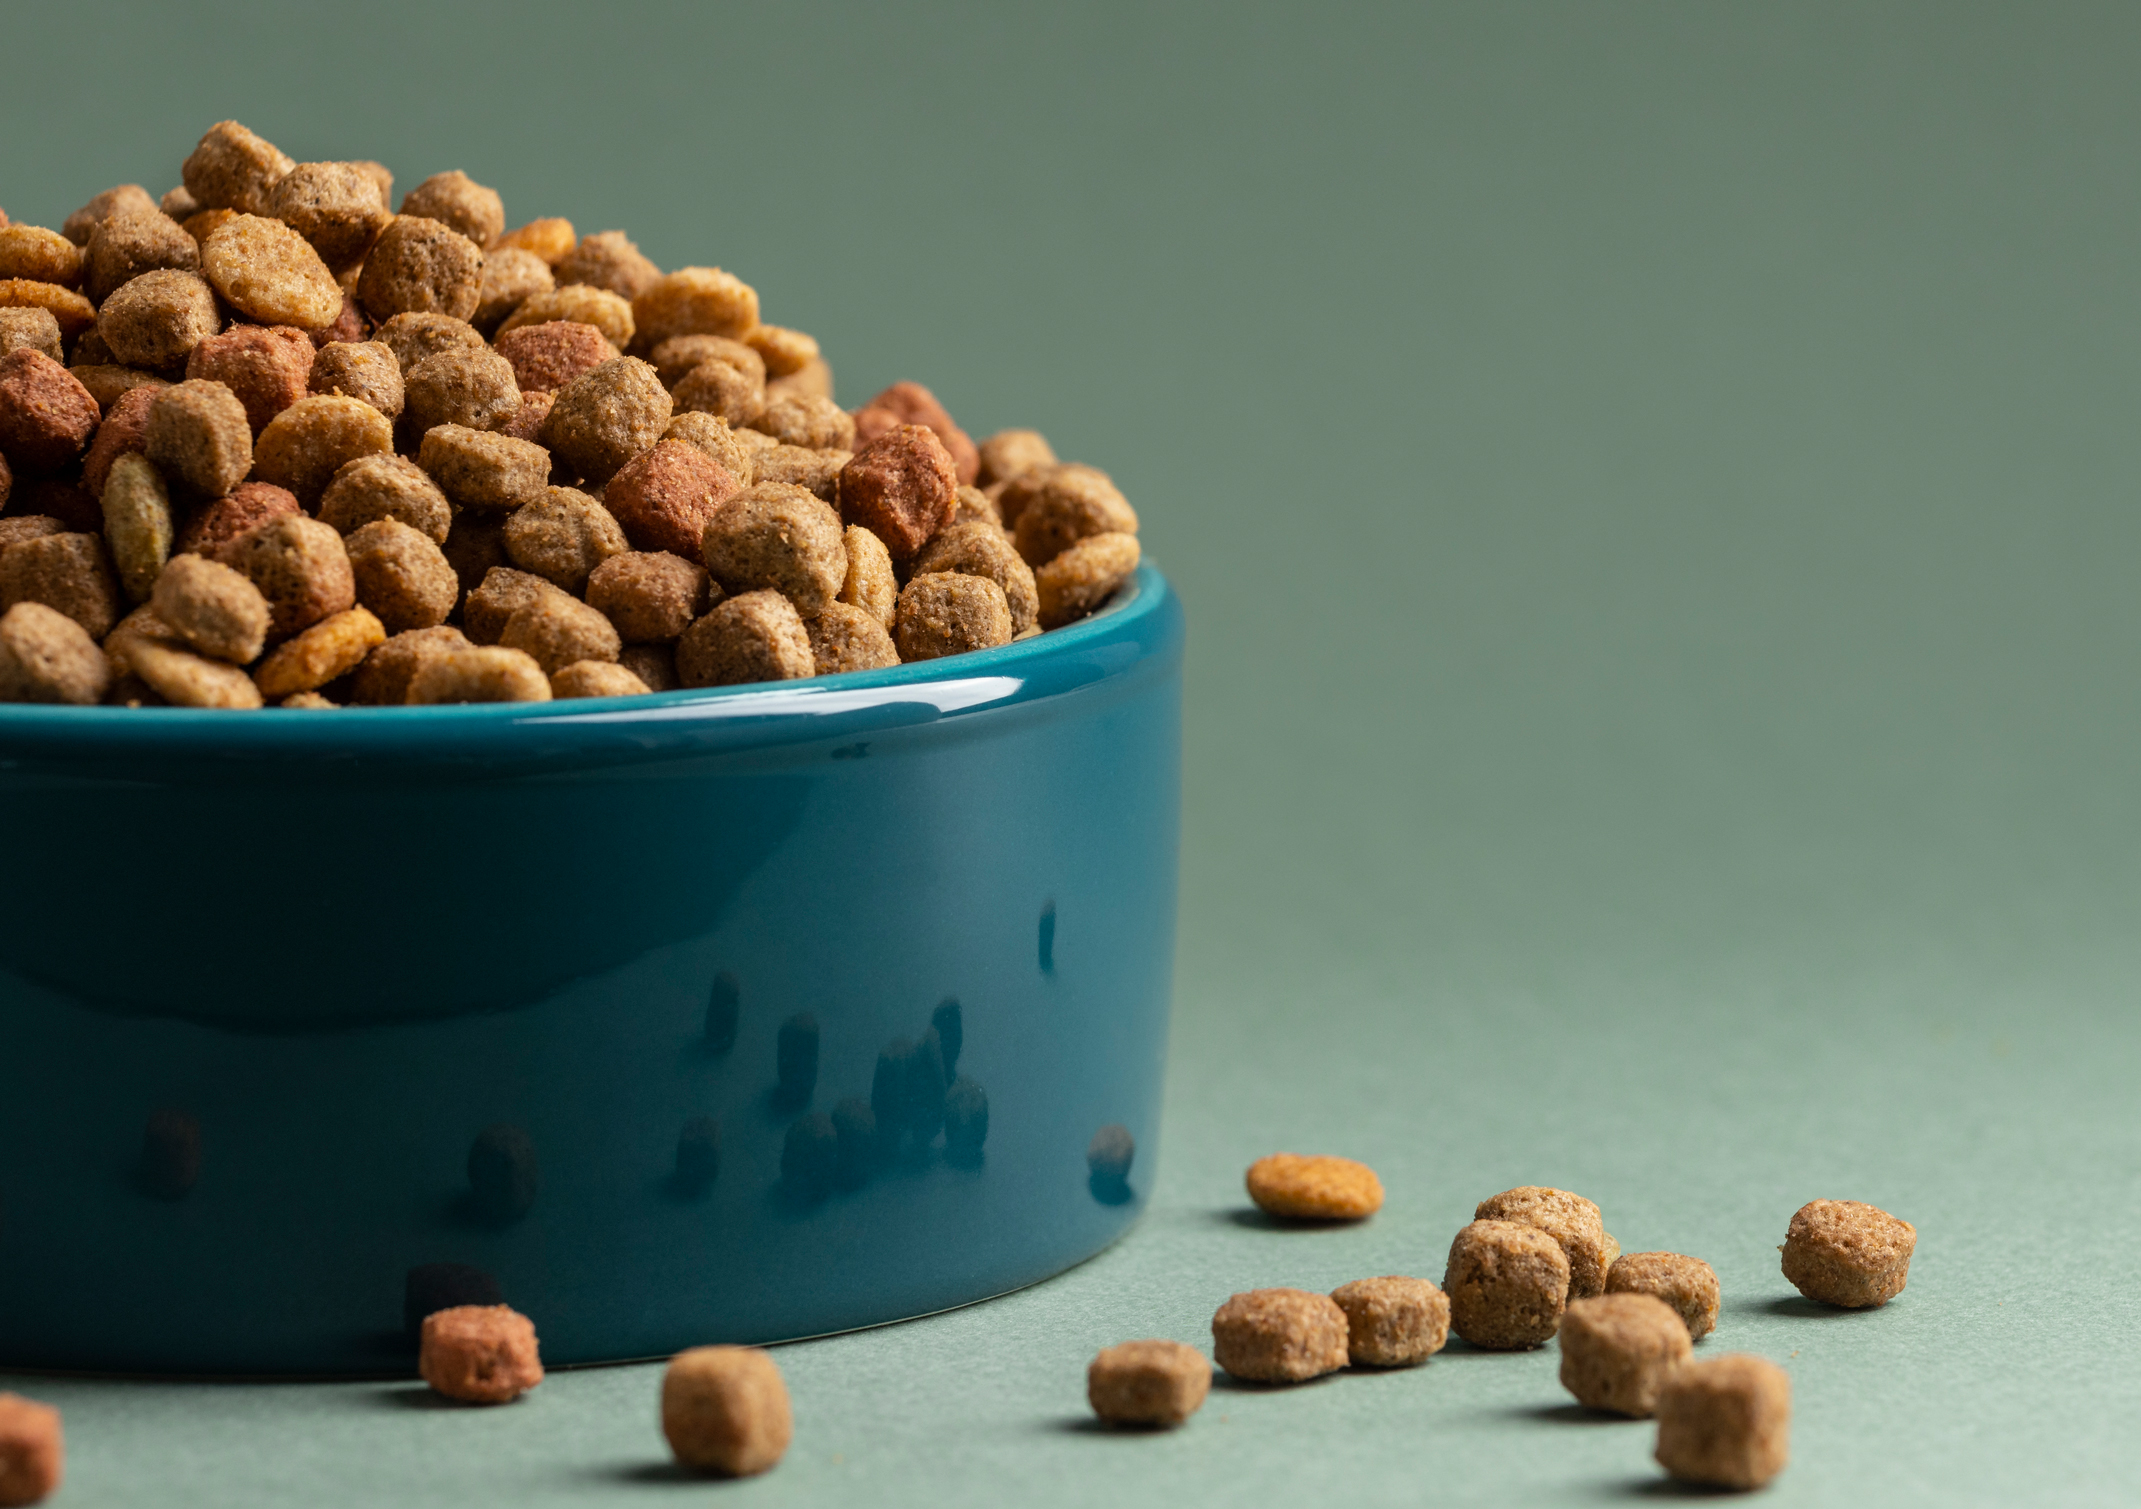 Films solutions for pet food, dry and dog food